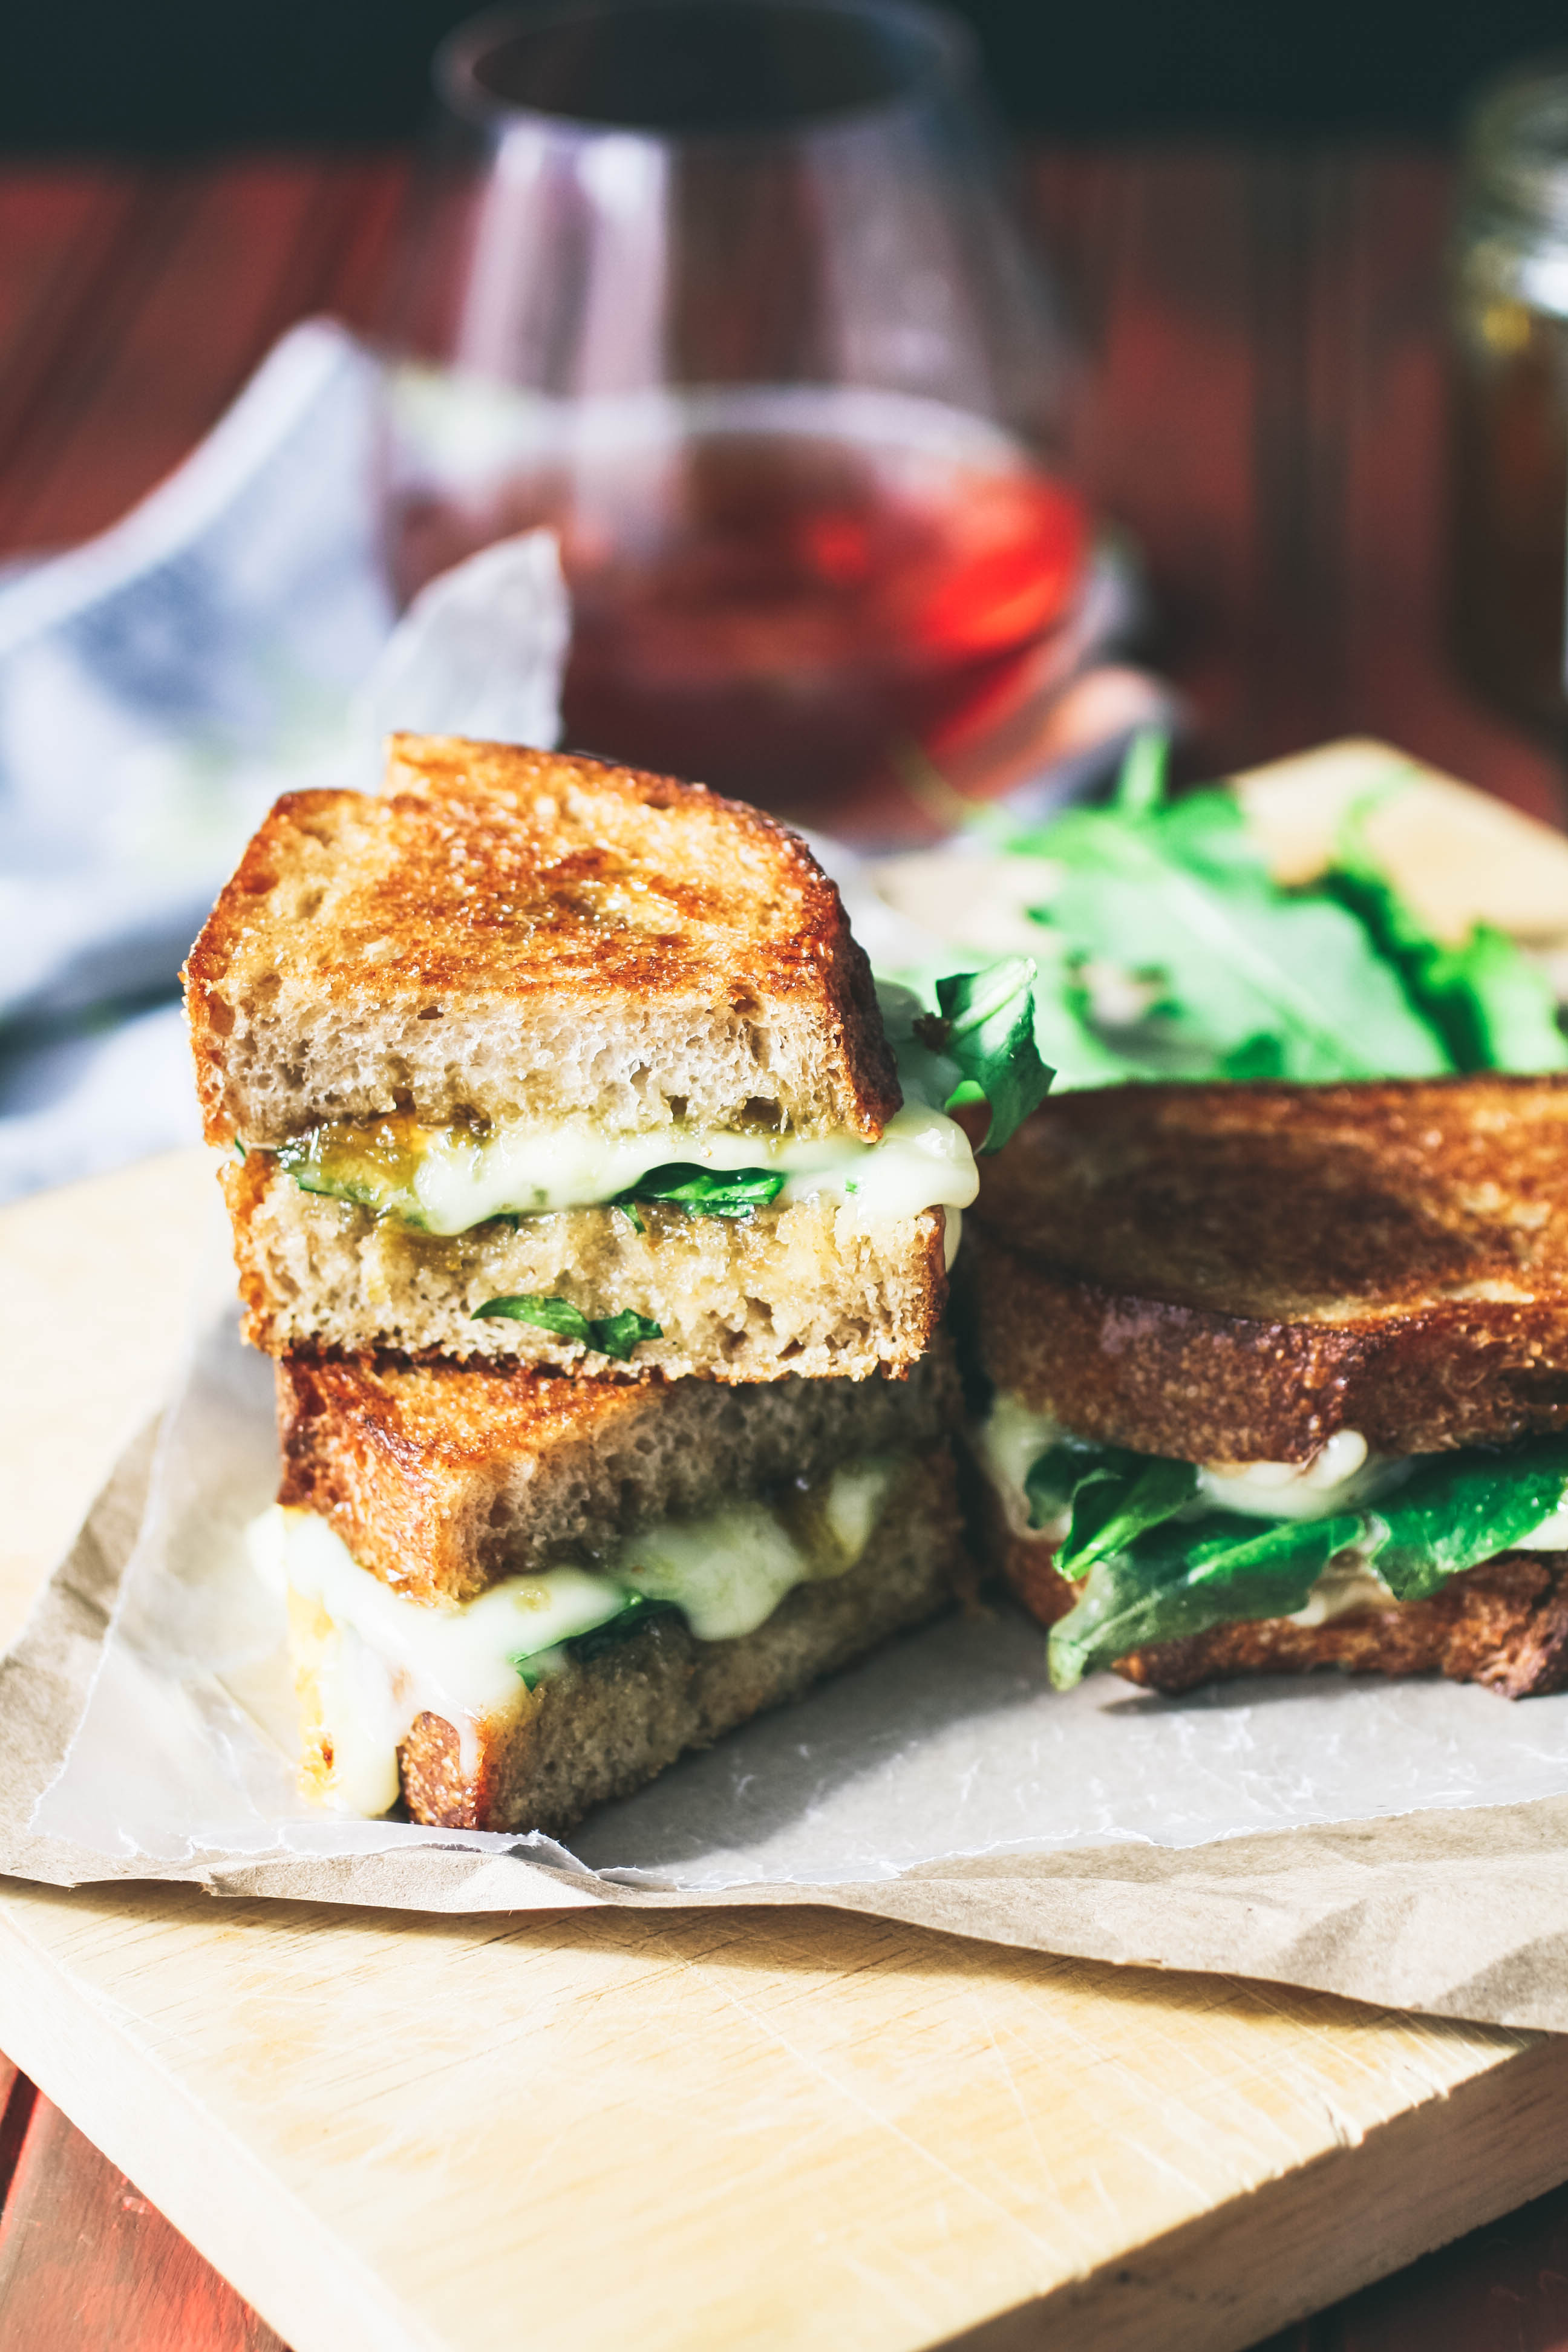 Grilled Brie, Fig Jam, and Dandelion Greens Sandwiches are delicious sandwiches for your next meal. Grilled Brie, Fig Jam, and Dandelion Greens Sandwiches make a unique and tasty meal.